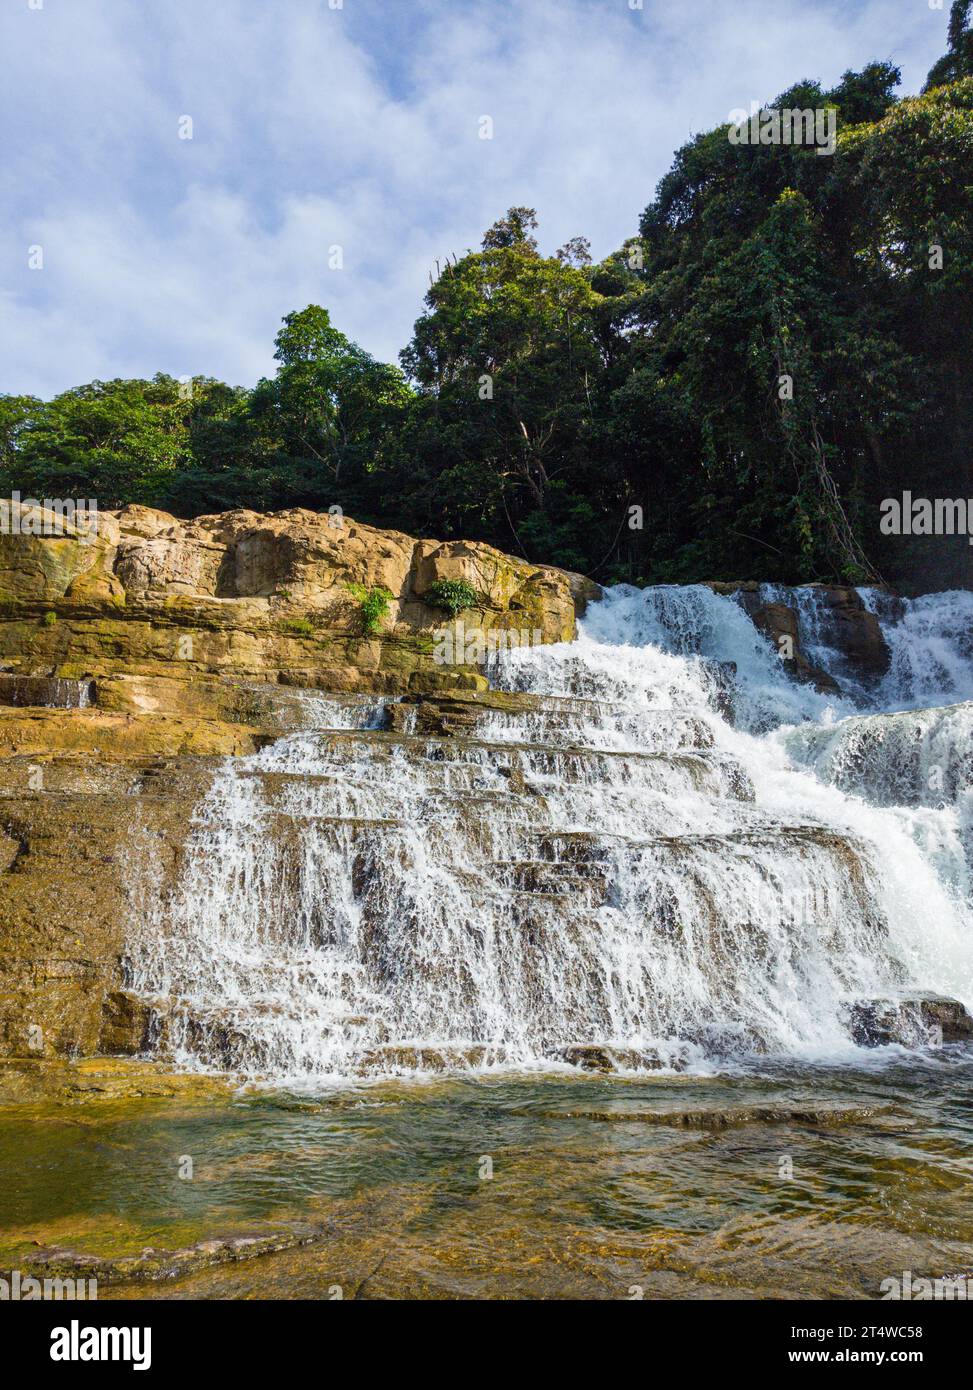 Tinuy-an Falls in Surigao del Sur. Waterfalls with clear water. Philippines. Stock Photo